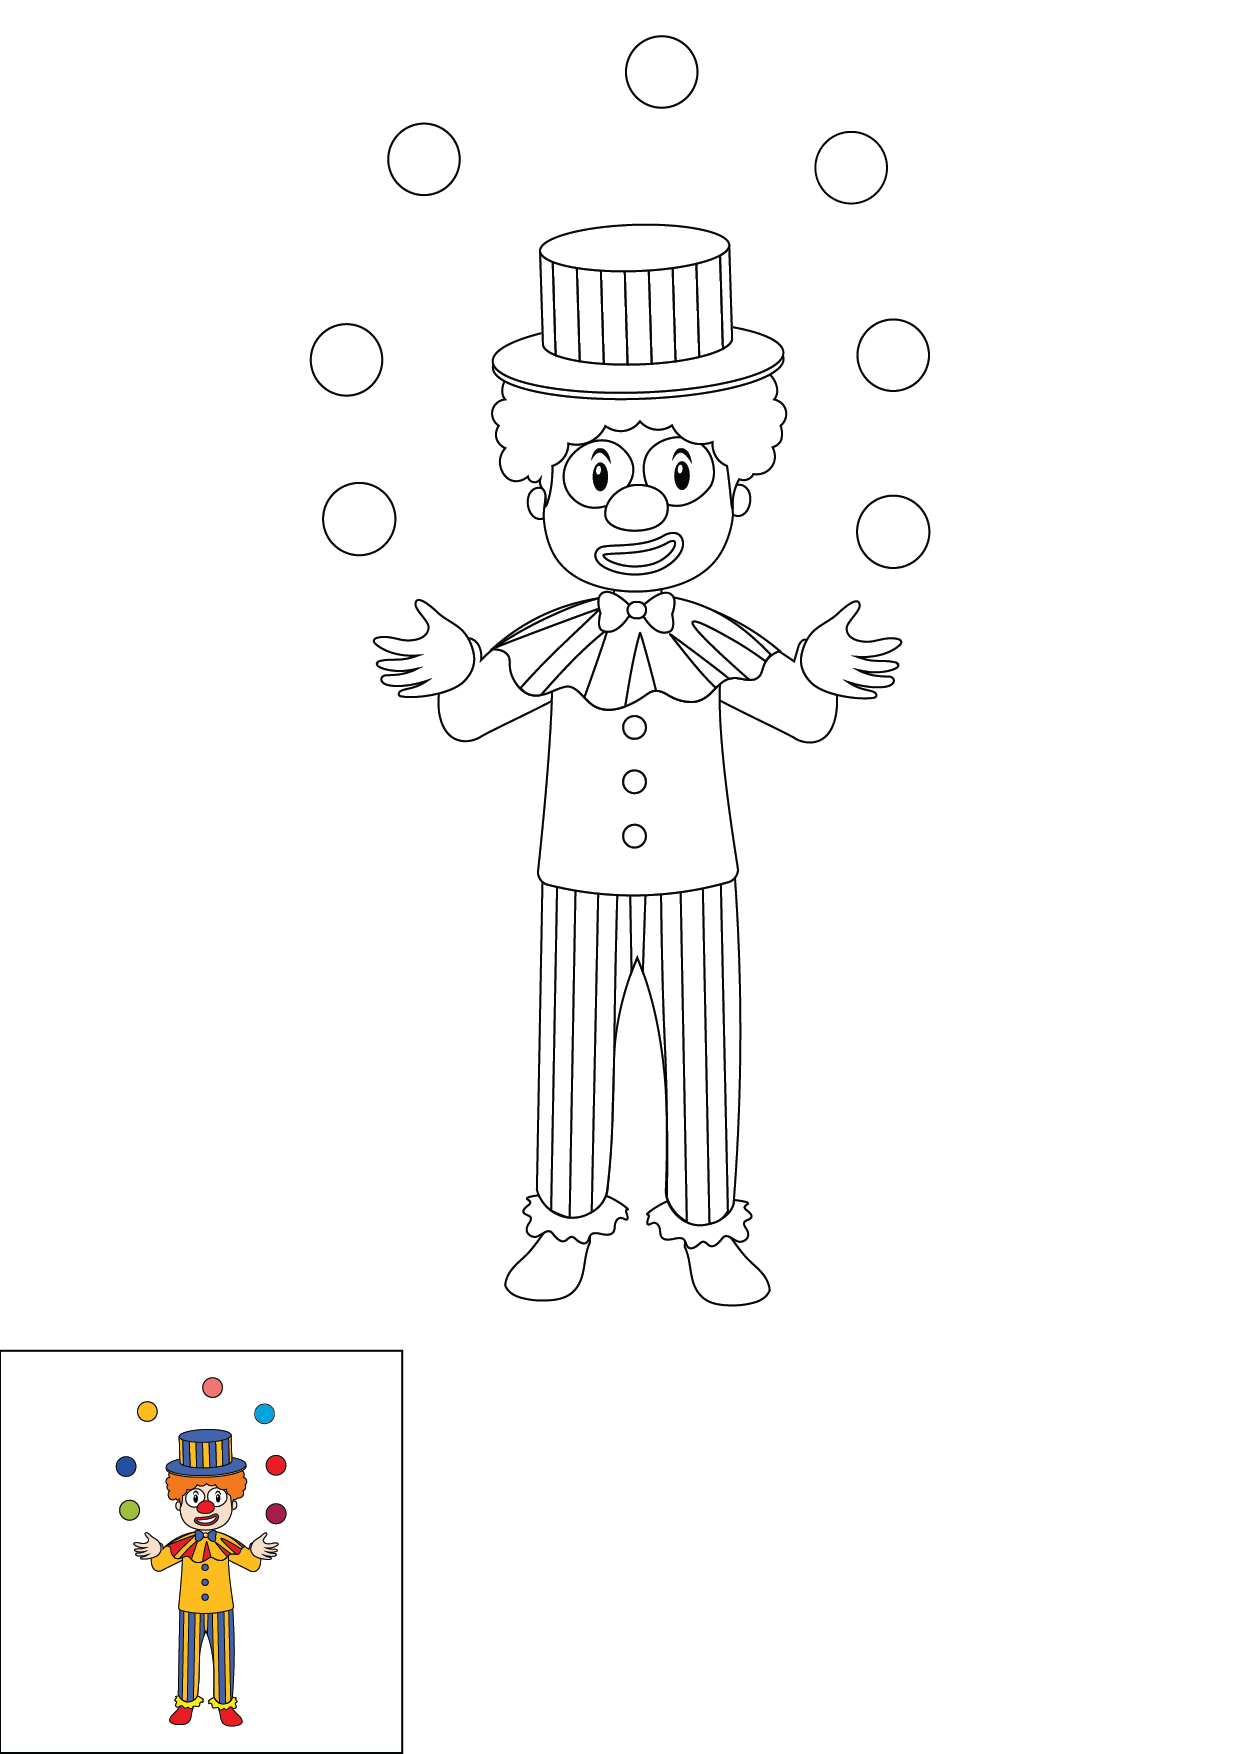 How to Draw A Clown Step by Step Printable Color